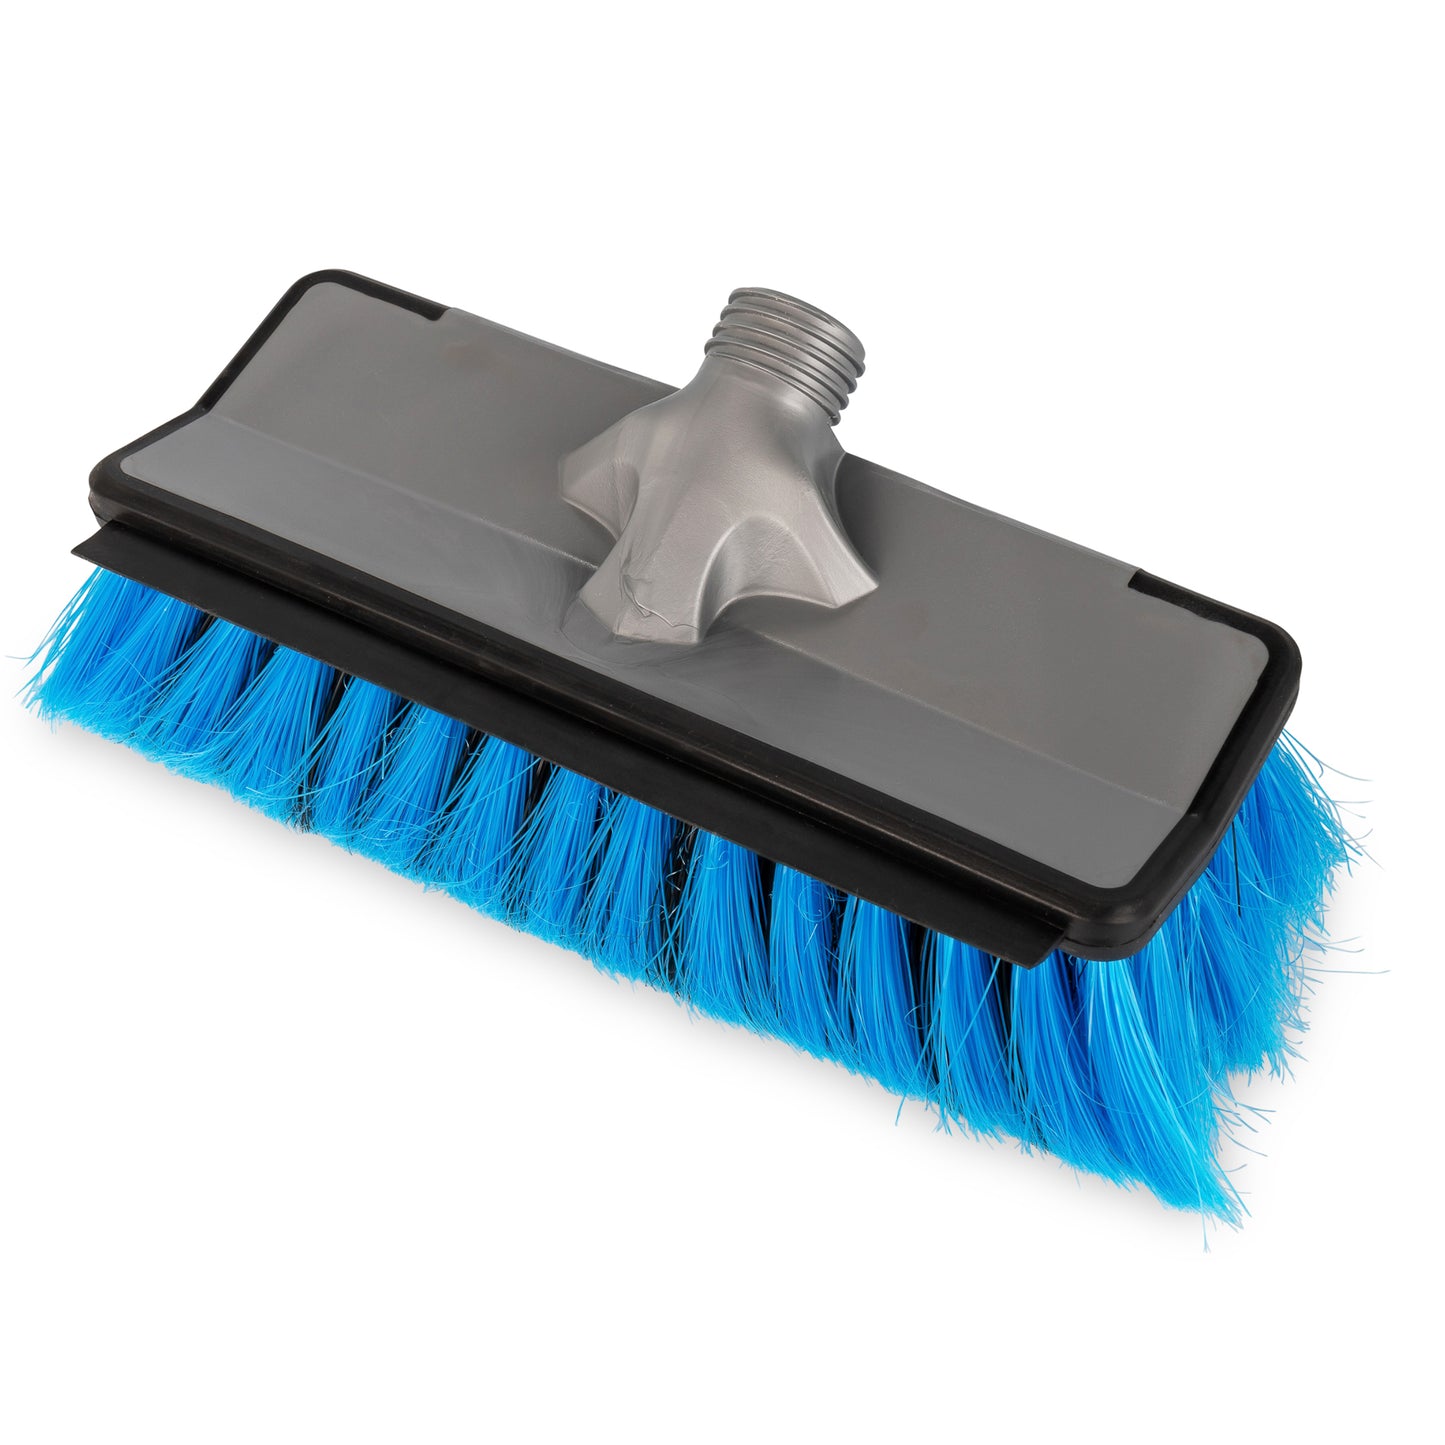 Camco Marine Wash Brush with Adjustable Flow Through Handle